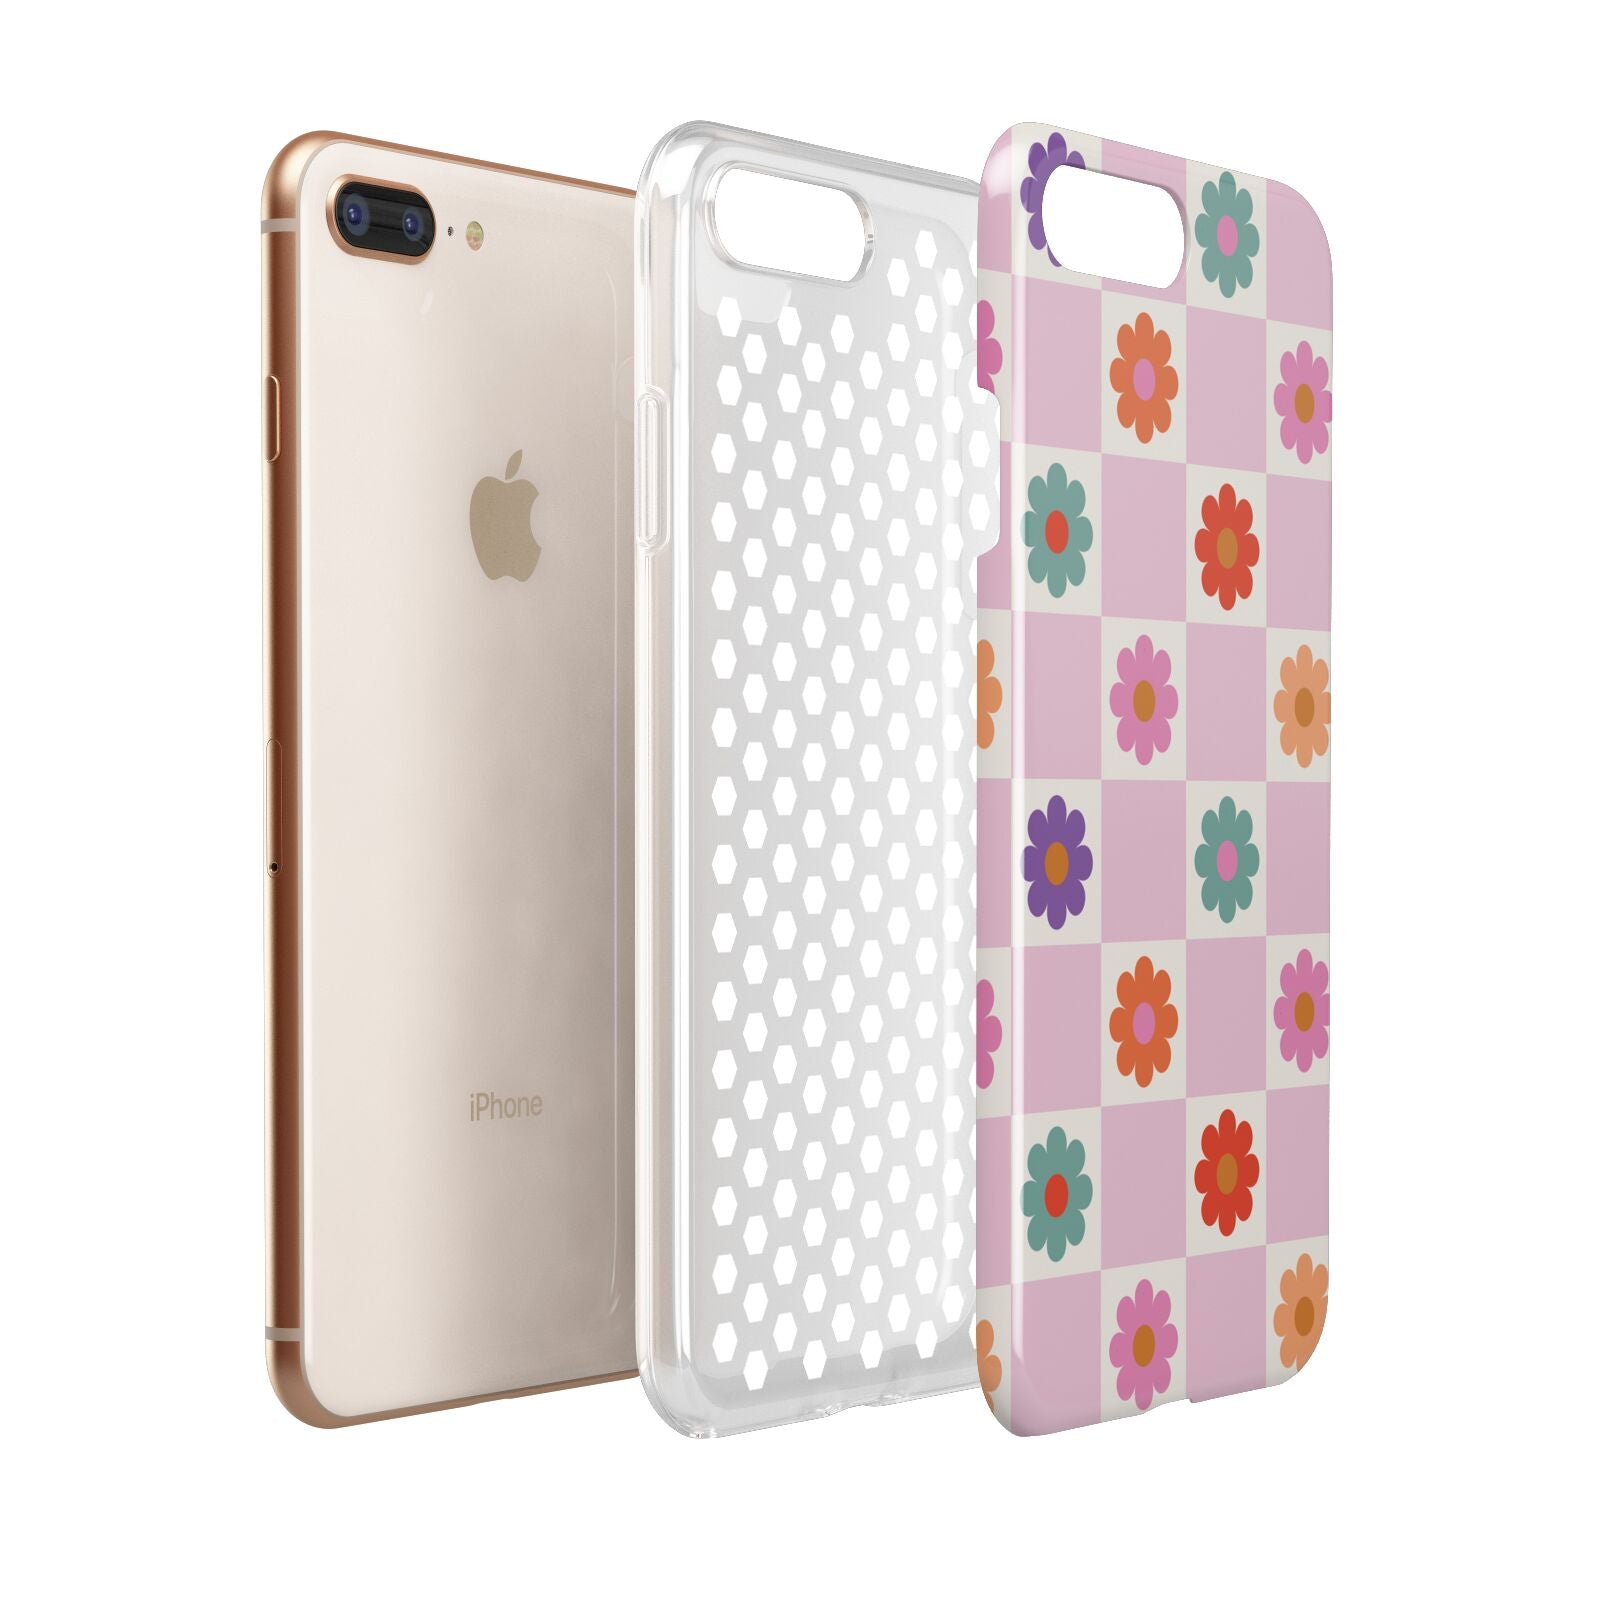 Checked flowers Apple iPhone 7 8 Plus 3D Tough Case Expanded View